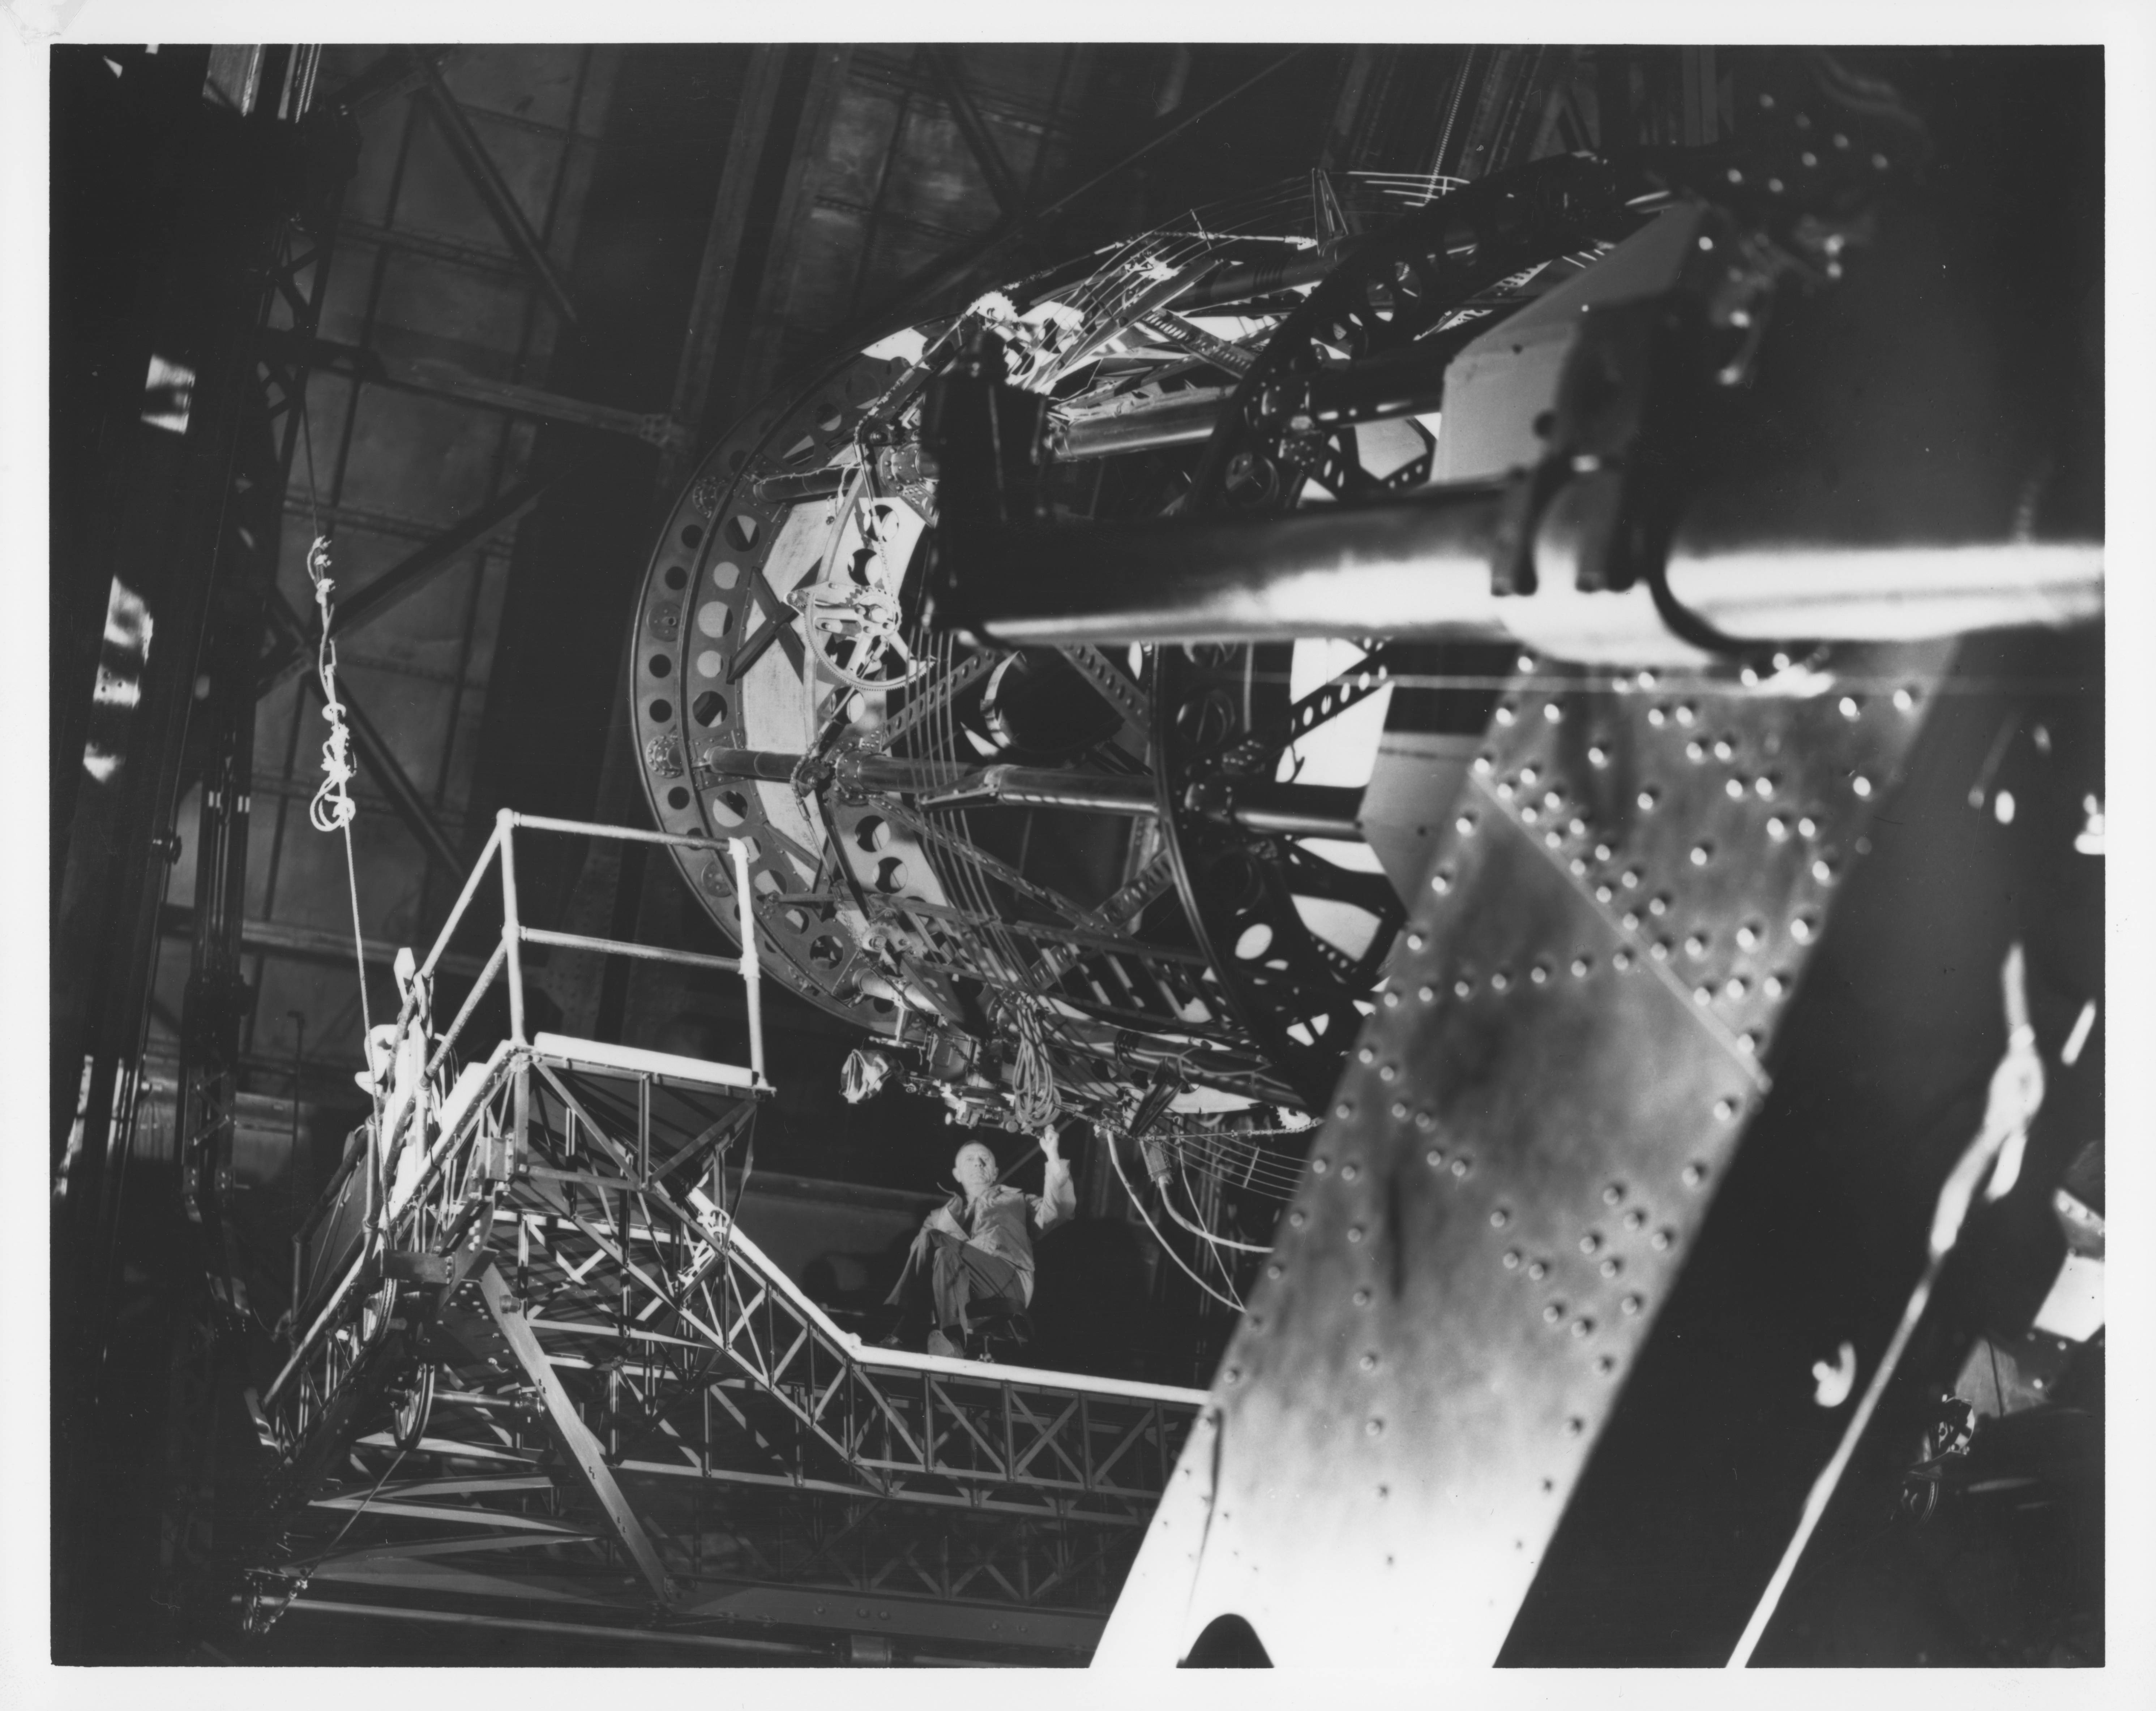 A man in the center is seated on a platform with his hand on a giant telescope that takes up the majority of the image, shot from below looking up.